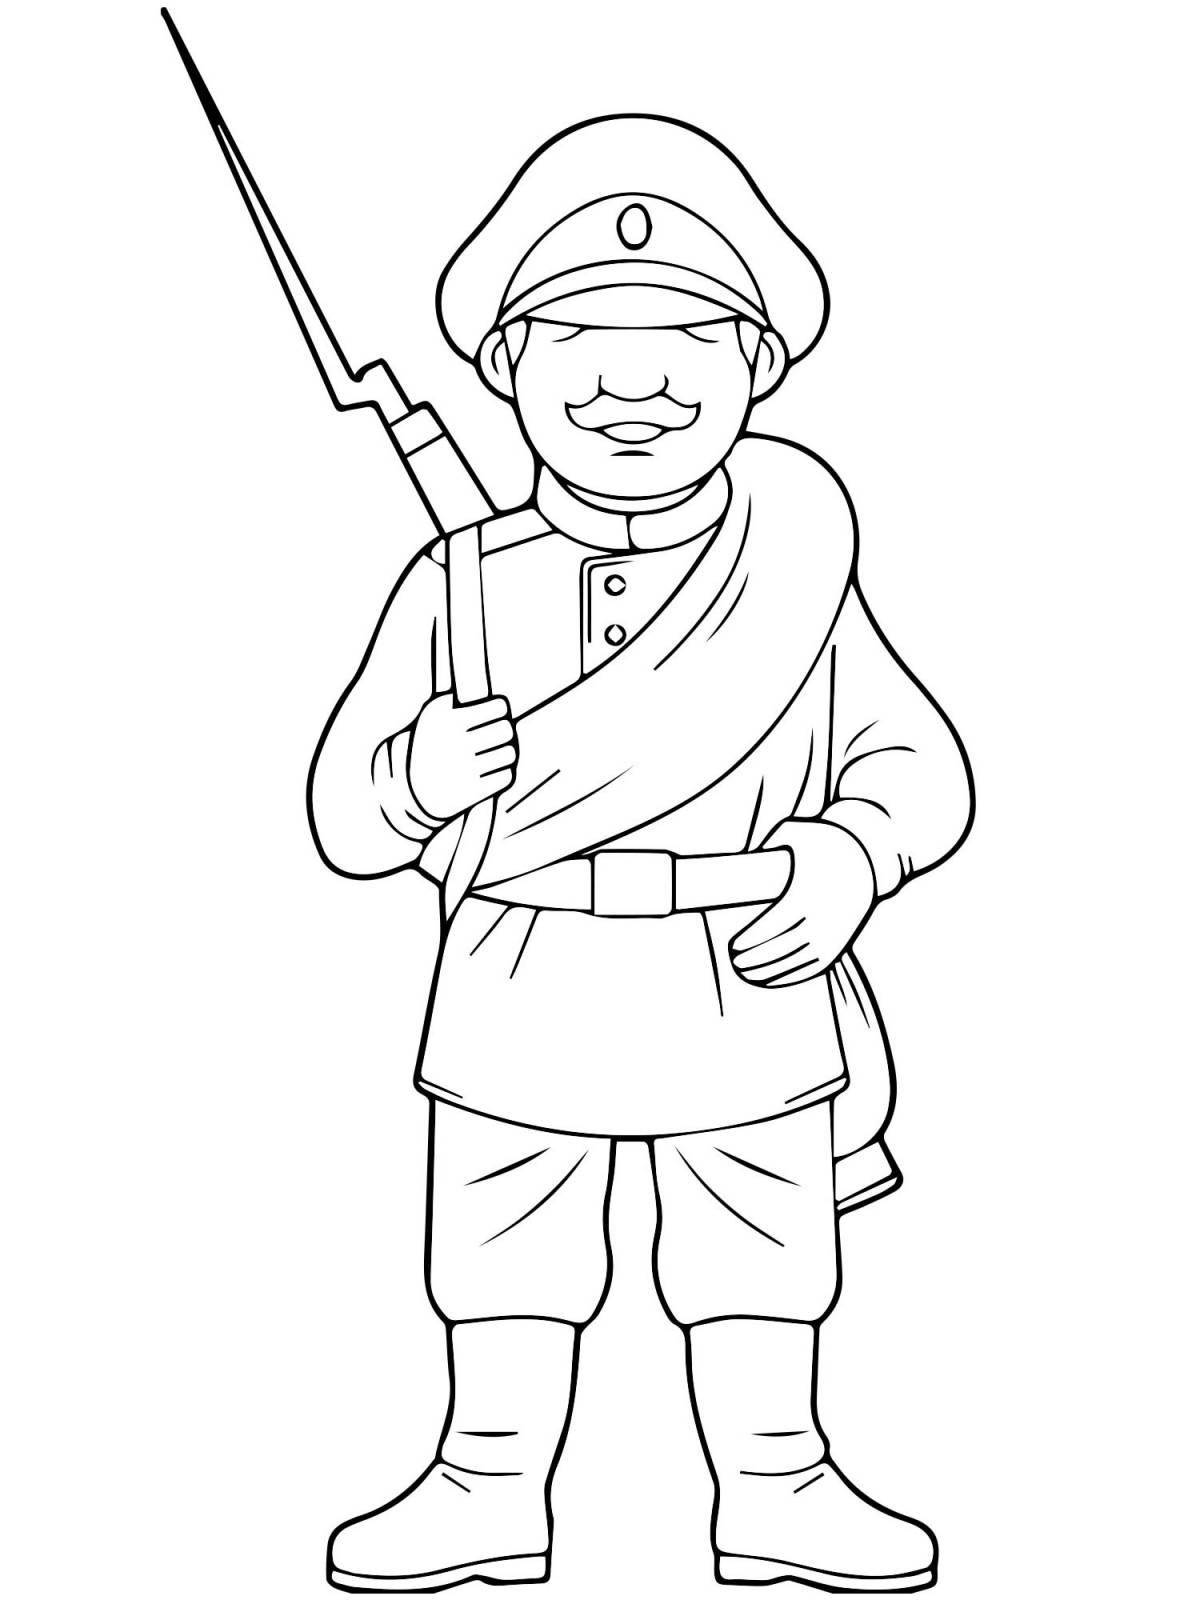 Soldier Engagement coloring book for 6-7 year olds